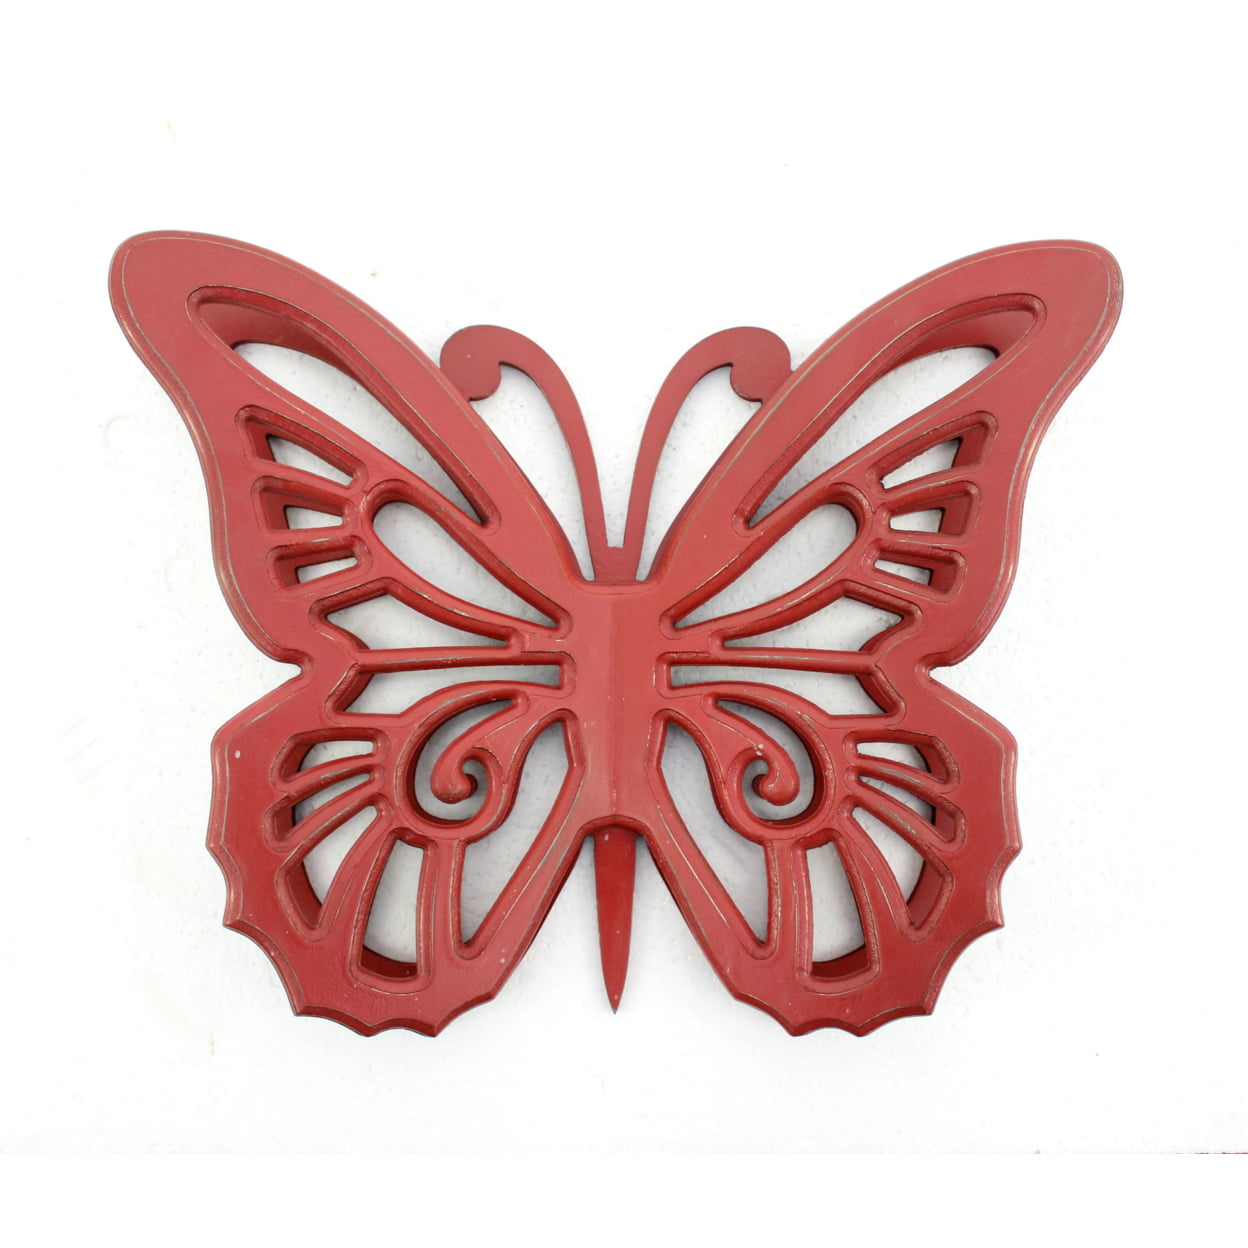 Picture of Benjara BM218333 Wooden Butterfly Wall Plaque with Cutout Detail, Red - 4.25 x 18.5 x 23.25 in.